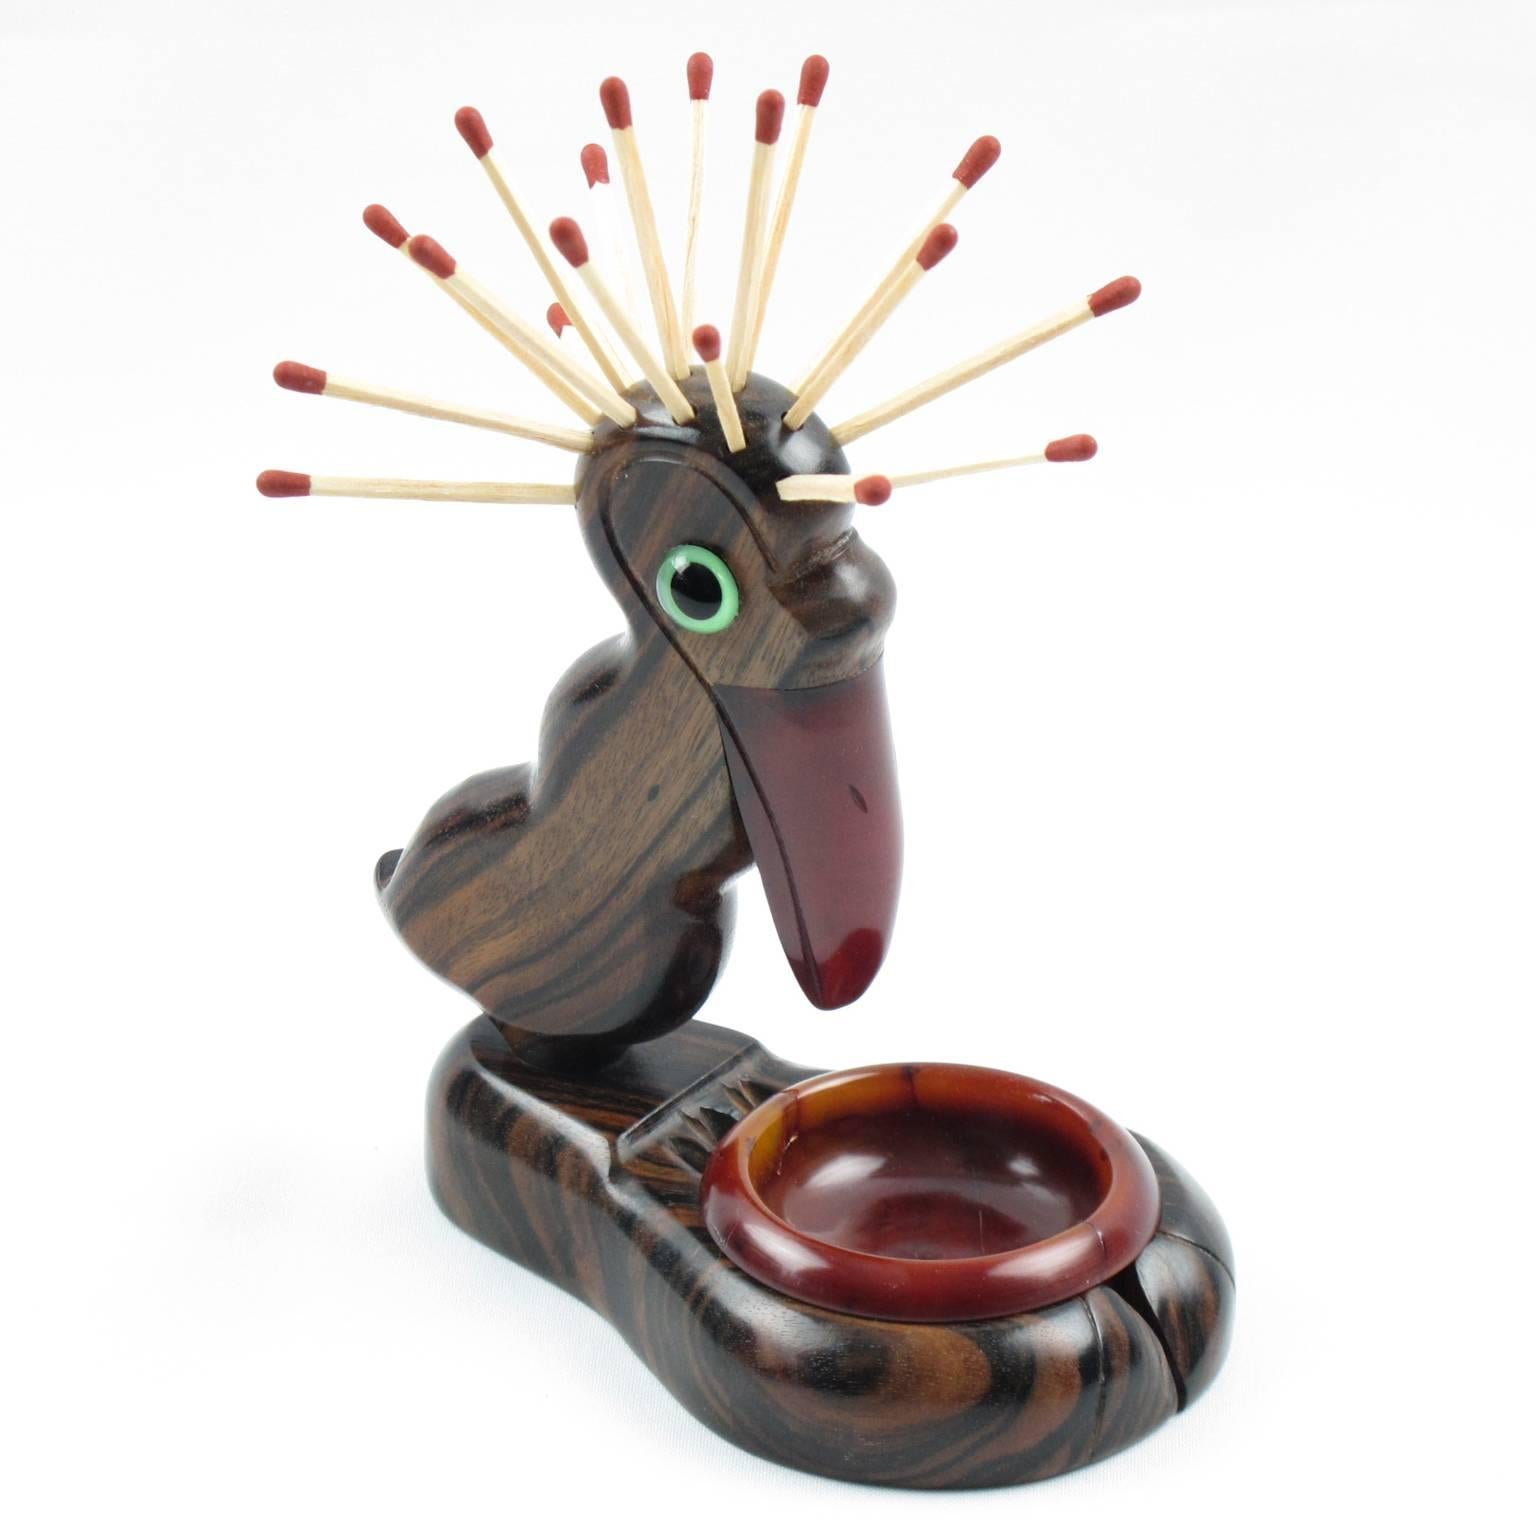 Rare iconic English Art Deco Henry Howell & Co Ltd, YZ bird novelty match holder, striker, ashtray, dating from the 1920s-1930s for Alfred Dunhill Ltd. The ultimate in grotesque, a stumpy plump pelican bird with an outrageous Mohican